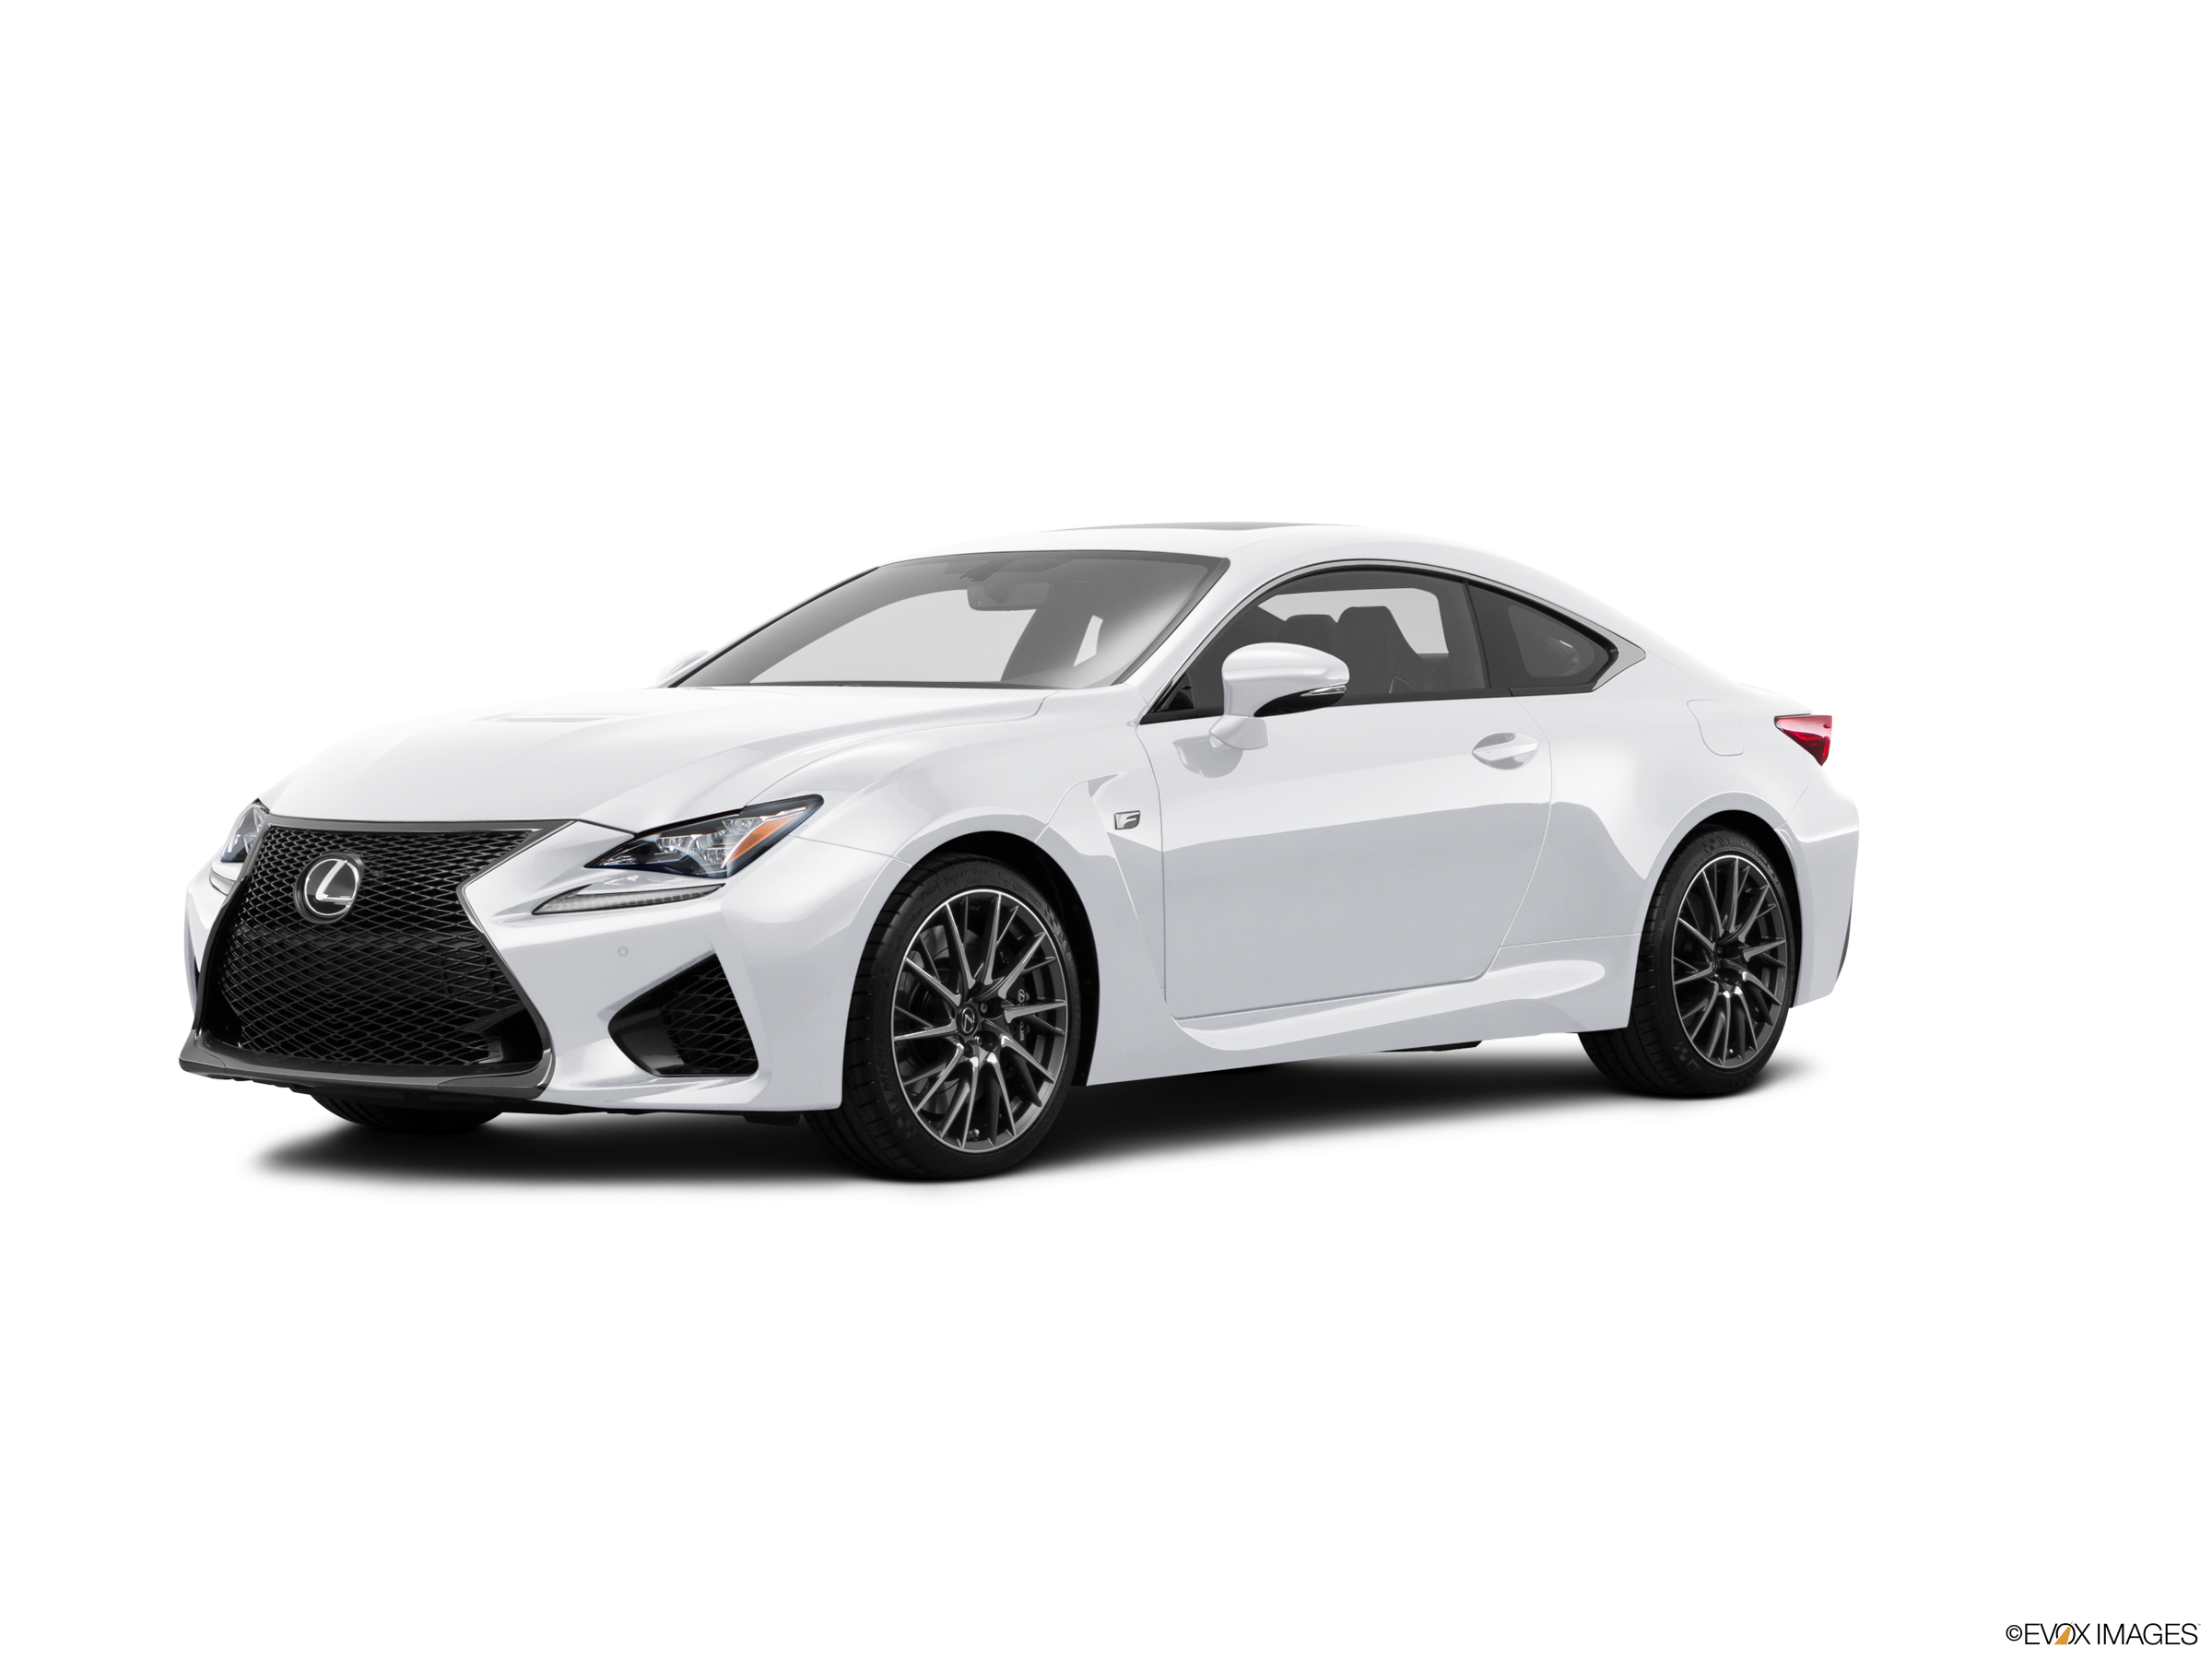 Used 2015 Lexus Rc F Coupe 2d Pricing Kelley Blue Book